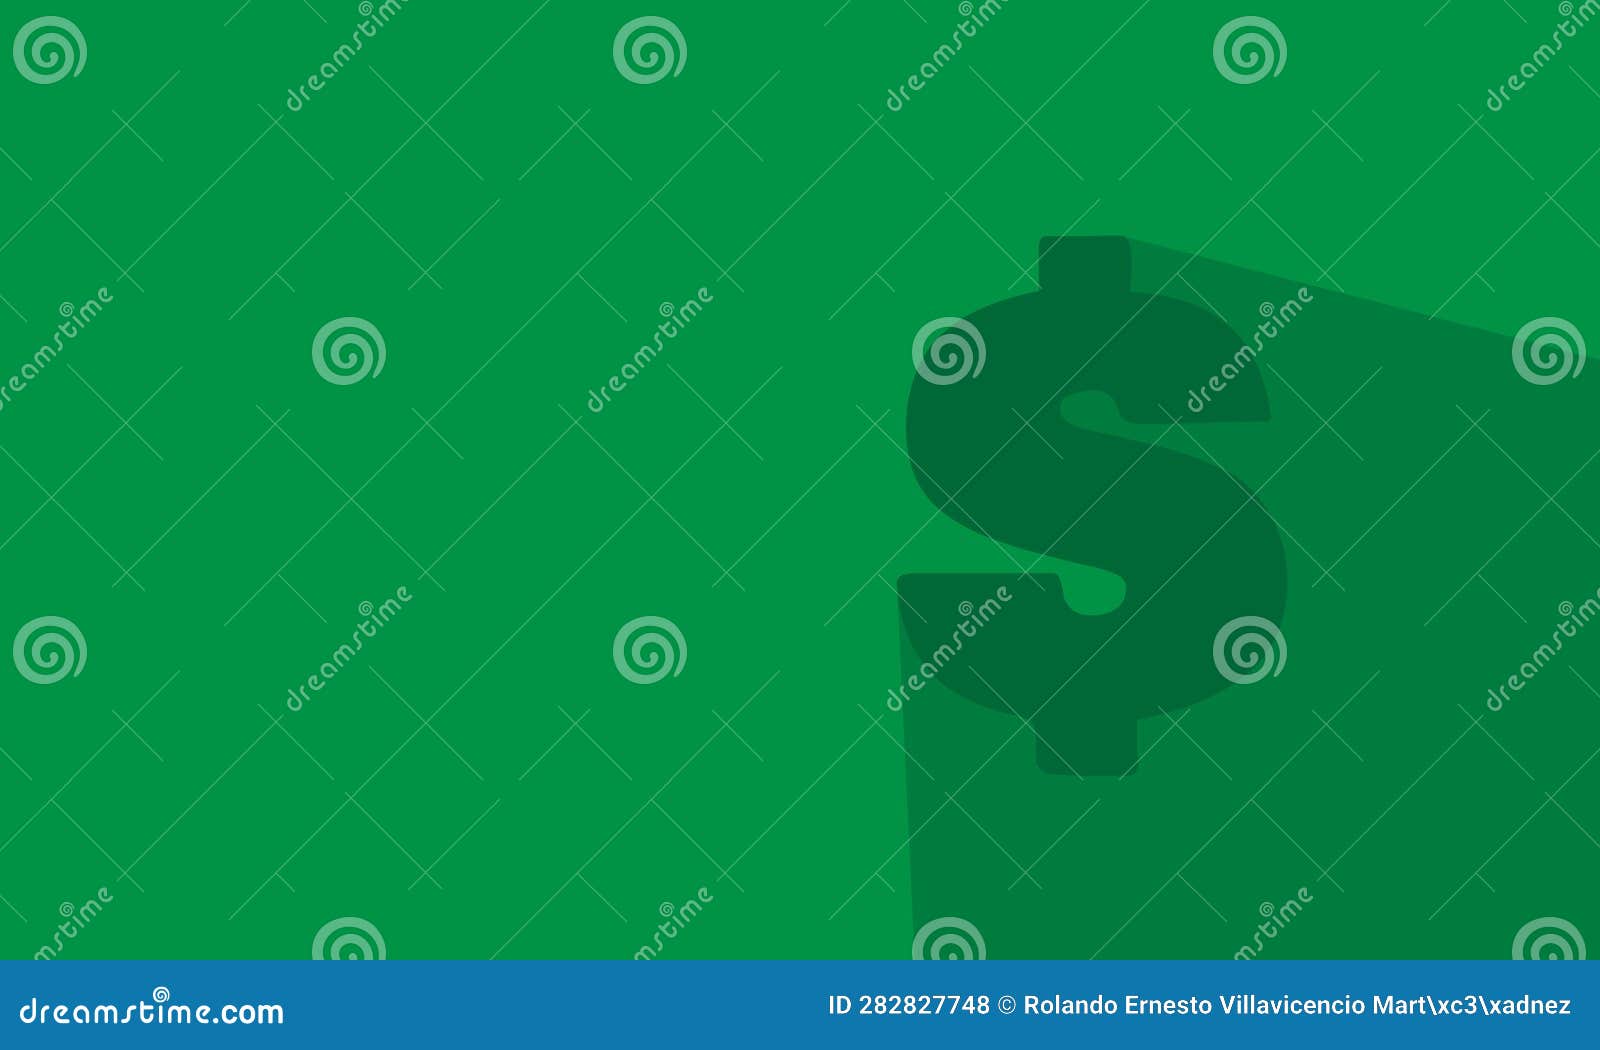 dollar  on green background. money and finances.